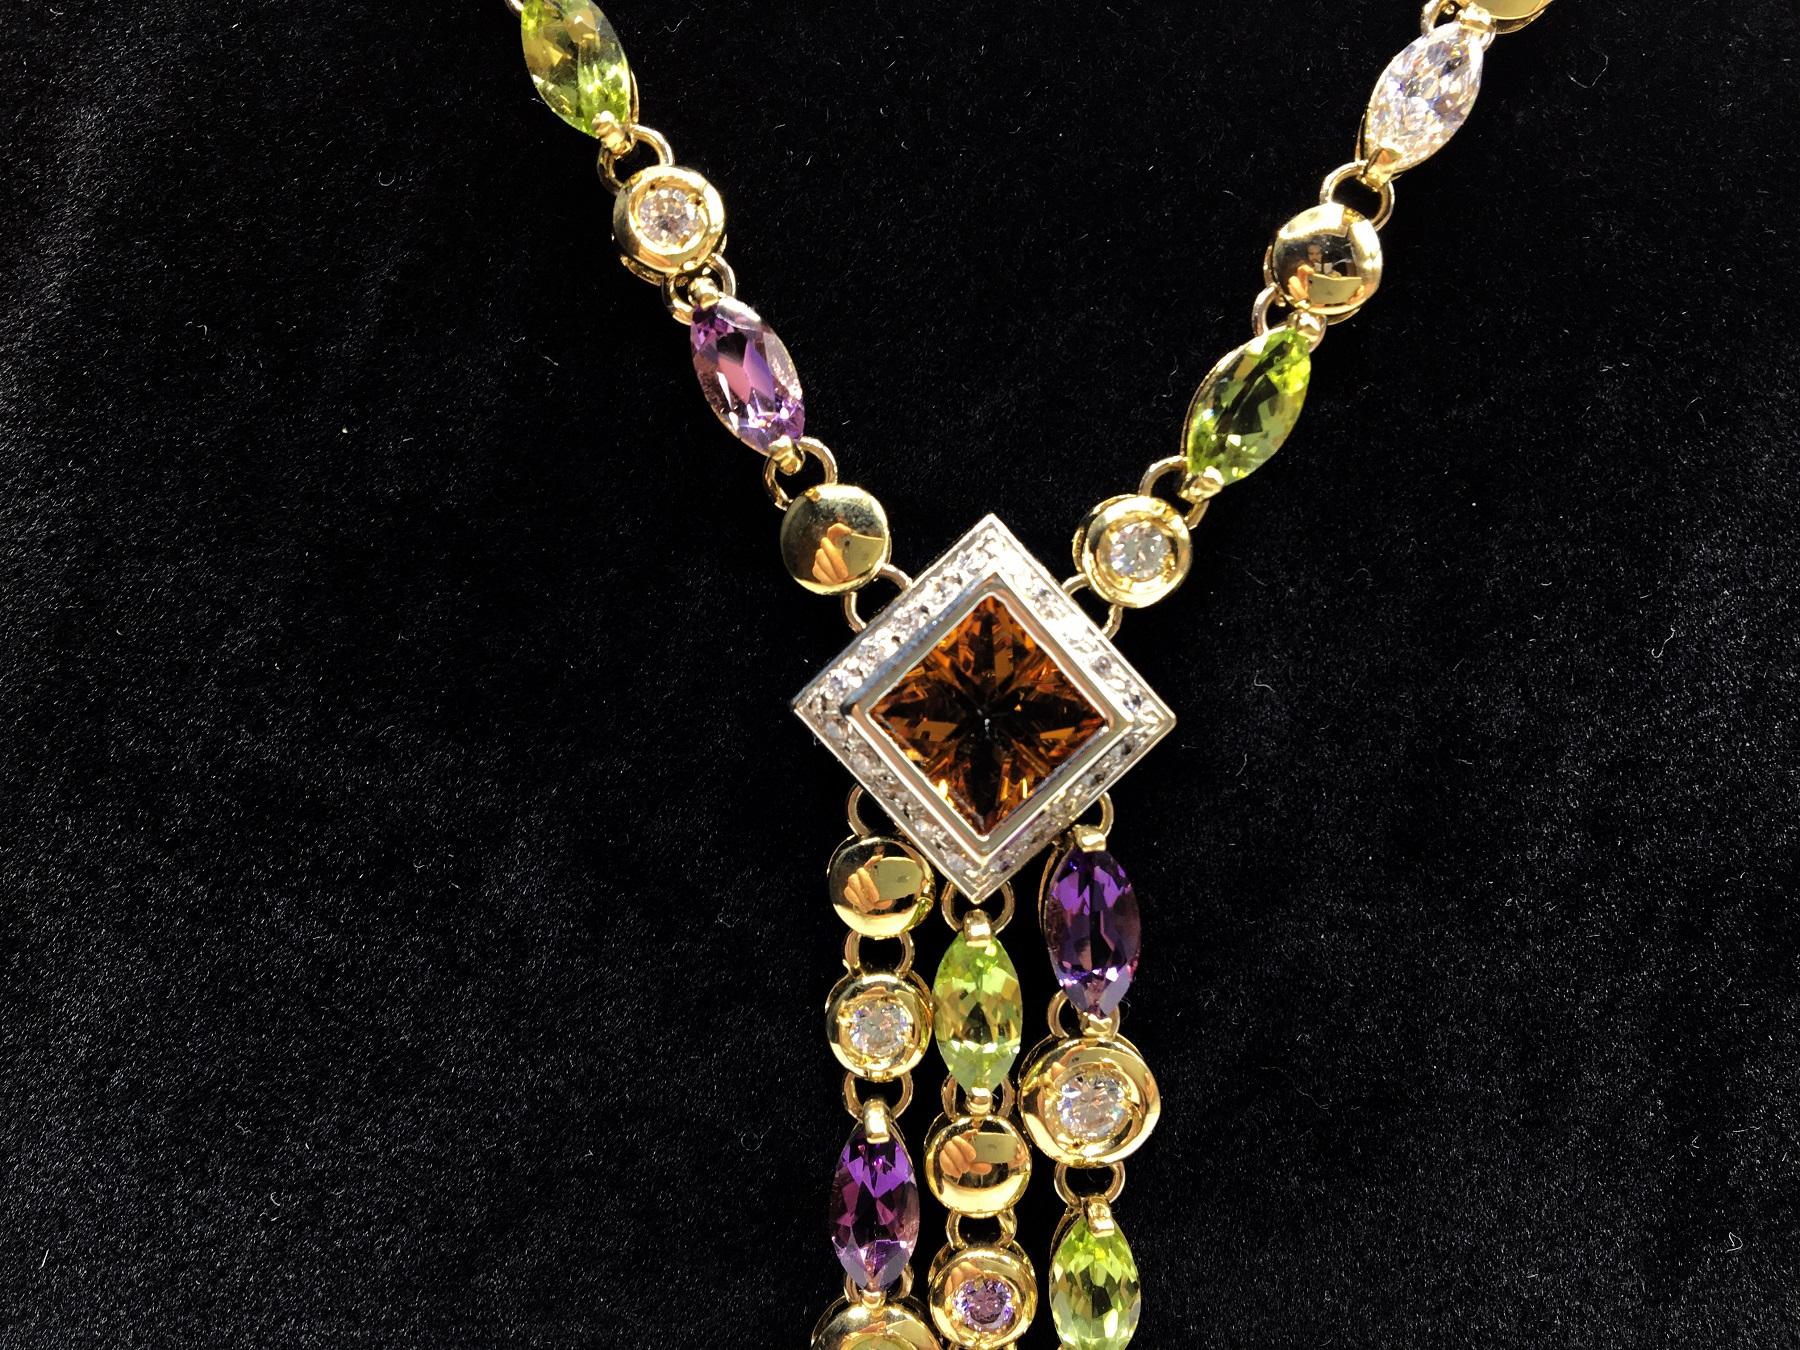 Beautiful pendent necklace with 18K yellow gold chain. This necklace is an explosion of colors with the many colored zircons and semi-precious stones that compose it. High Italian gold craftsmanship. Perfect for a young woman to wear on a summer